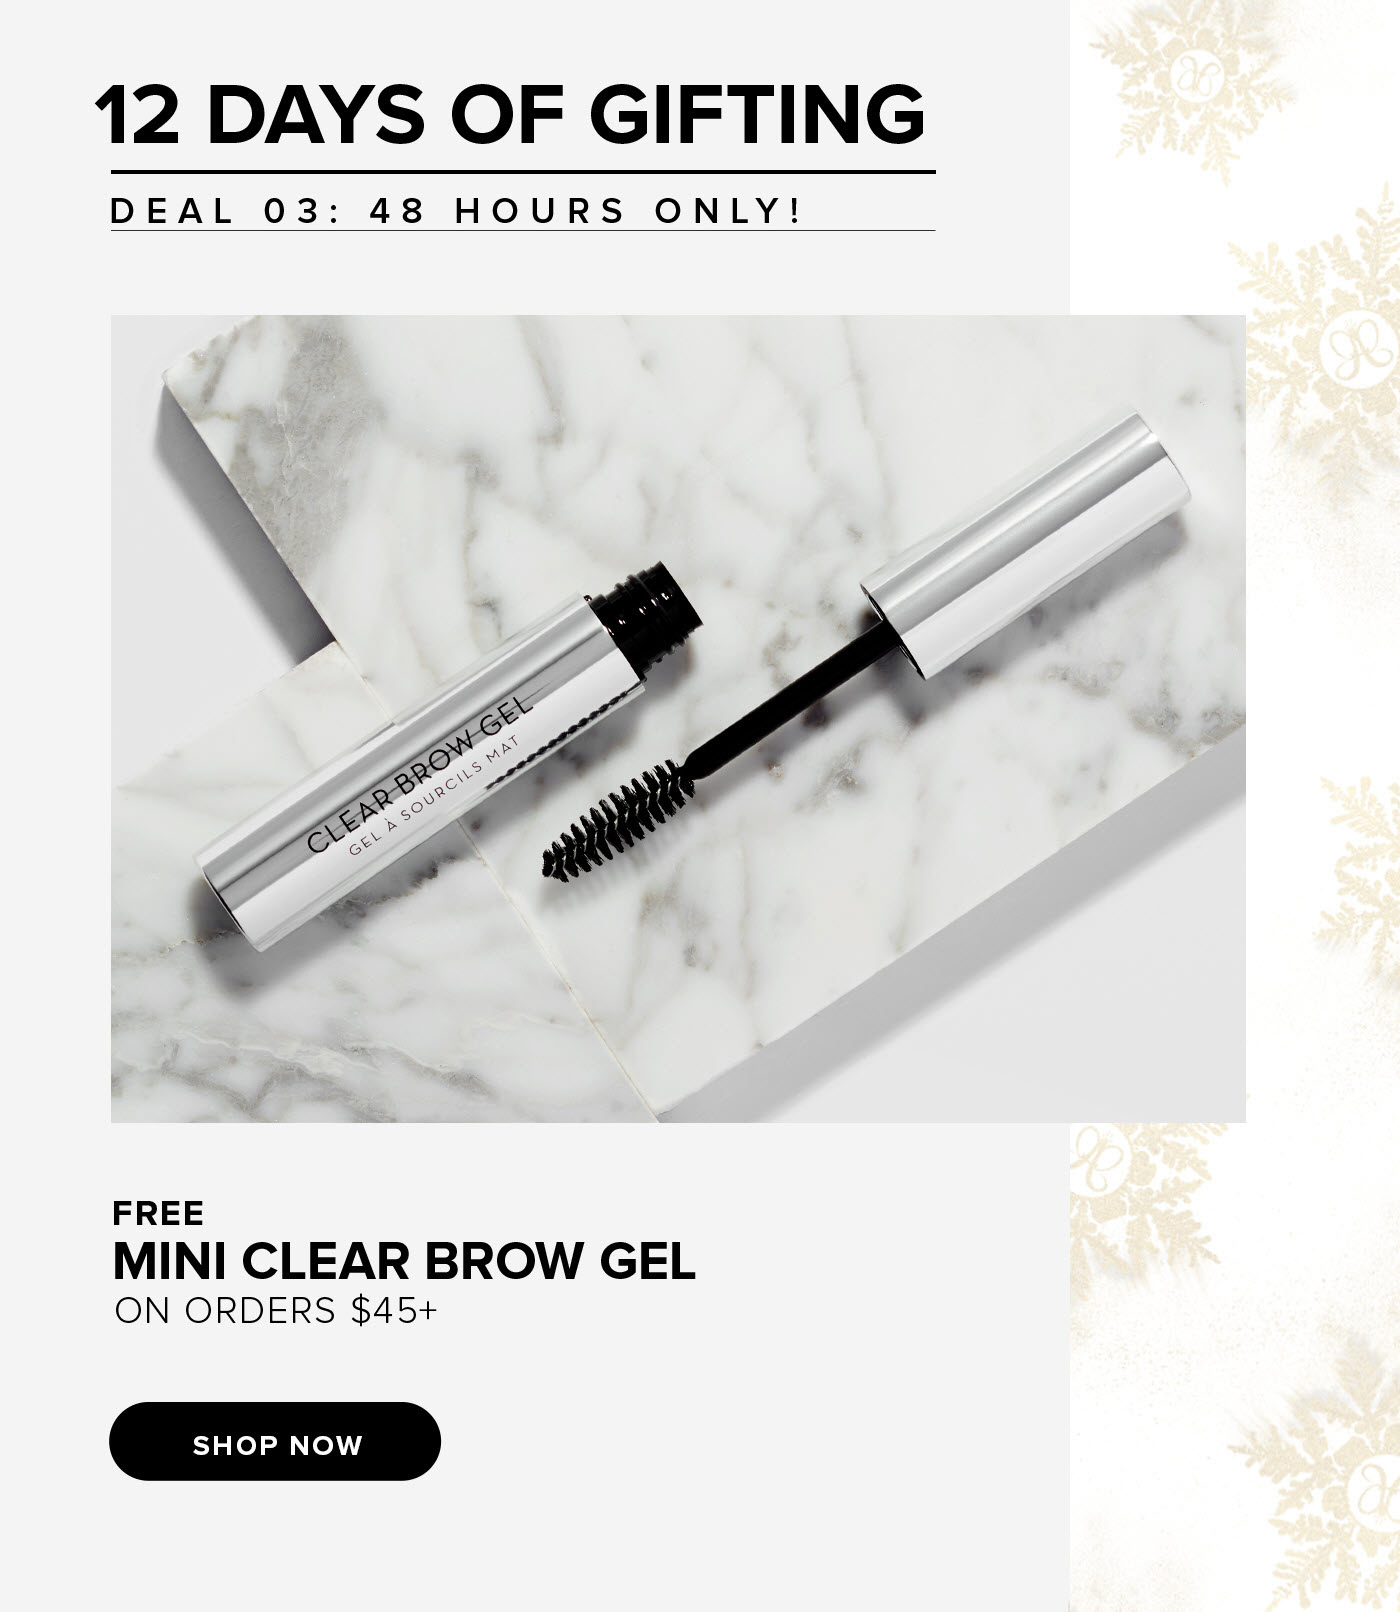 12 Days of Gifting - Deal 3: Free Mini Clear Brow Gel on Orders $45+